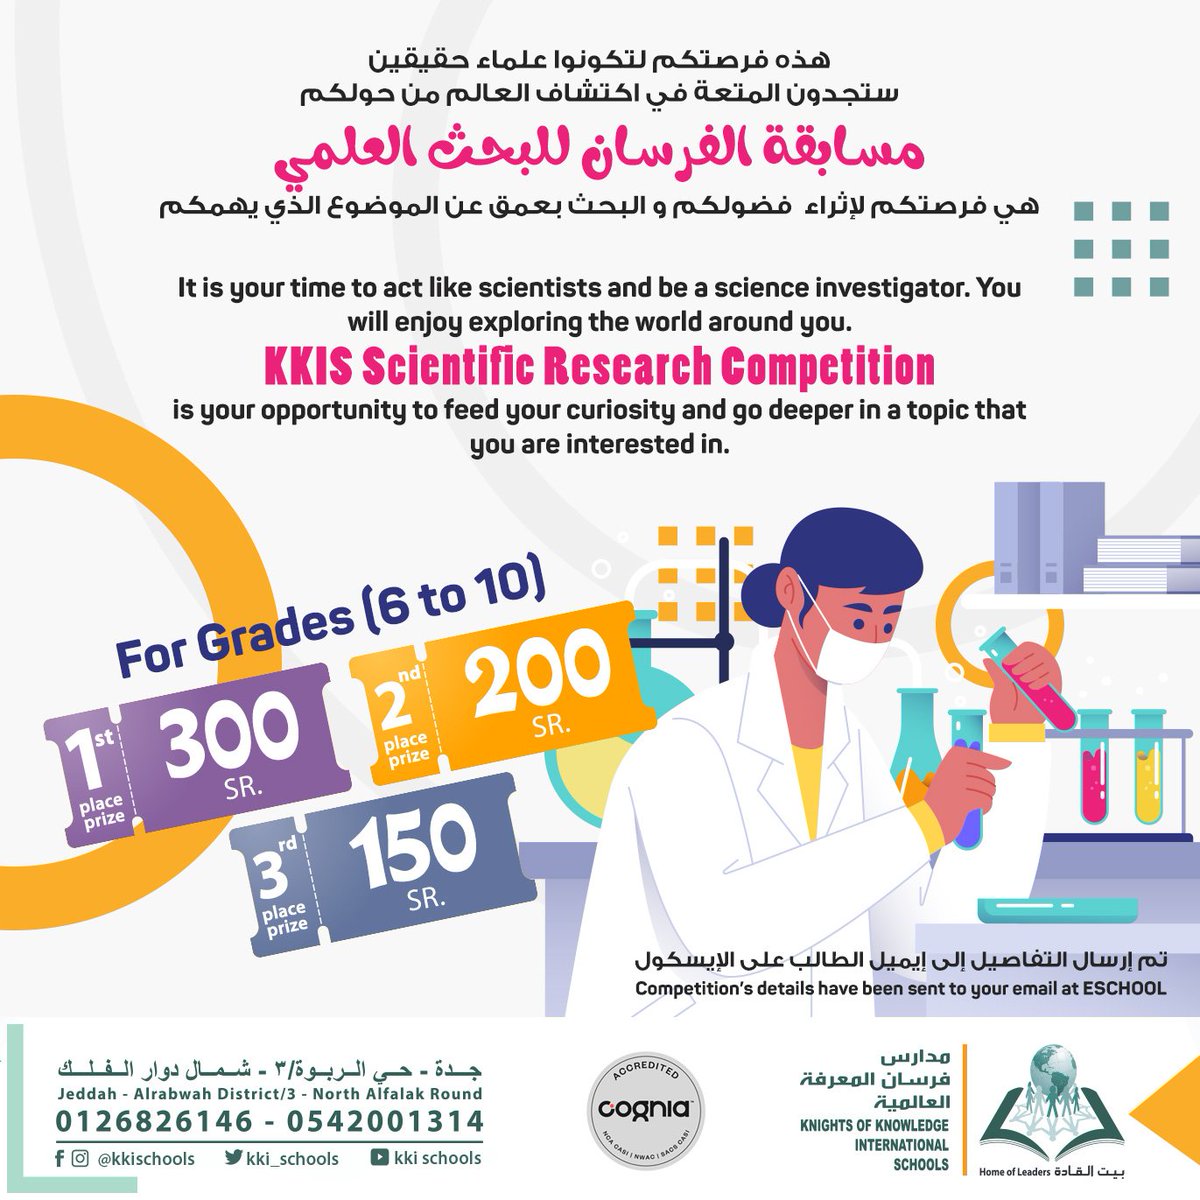 Dear Grade 6 to Grade 10 Students: 
The competition details have been sent to your email at ESCHOOL.

#science #sciencecompetition #research #KsaJeddah #KSA #مسابقة #بحث_علمي #السعودية #جده #علوم